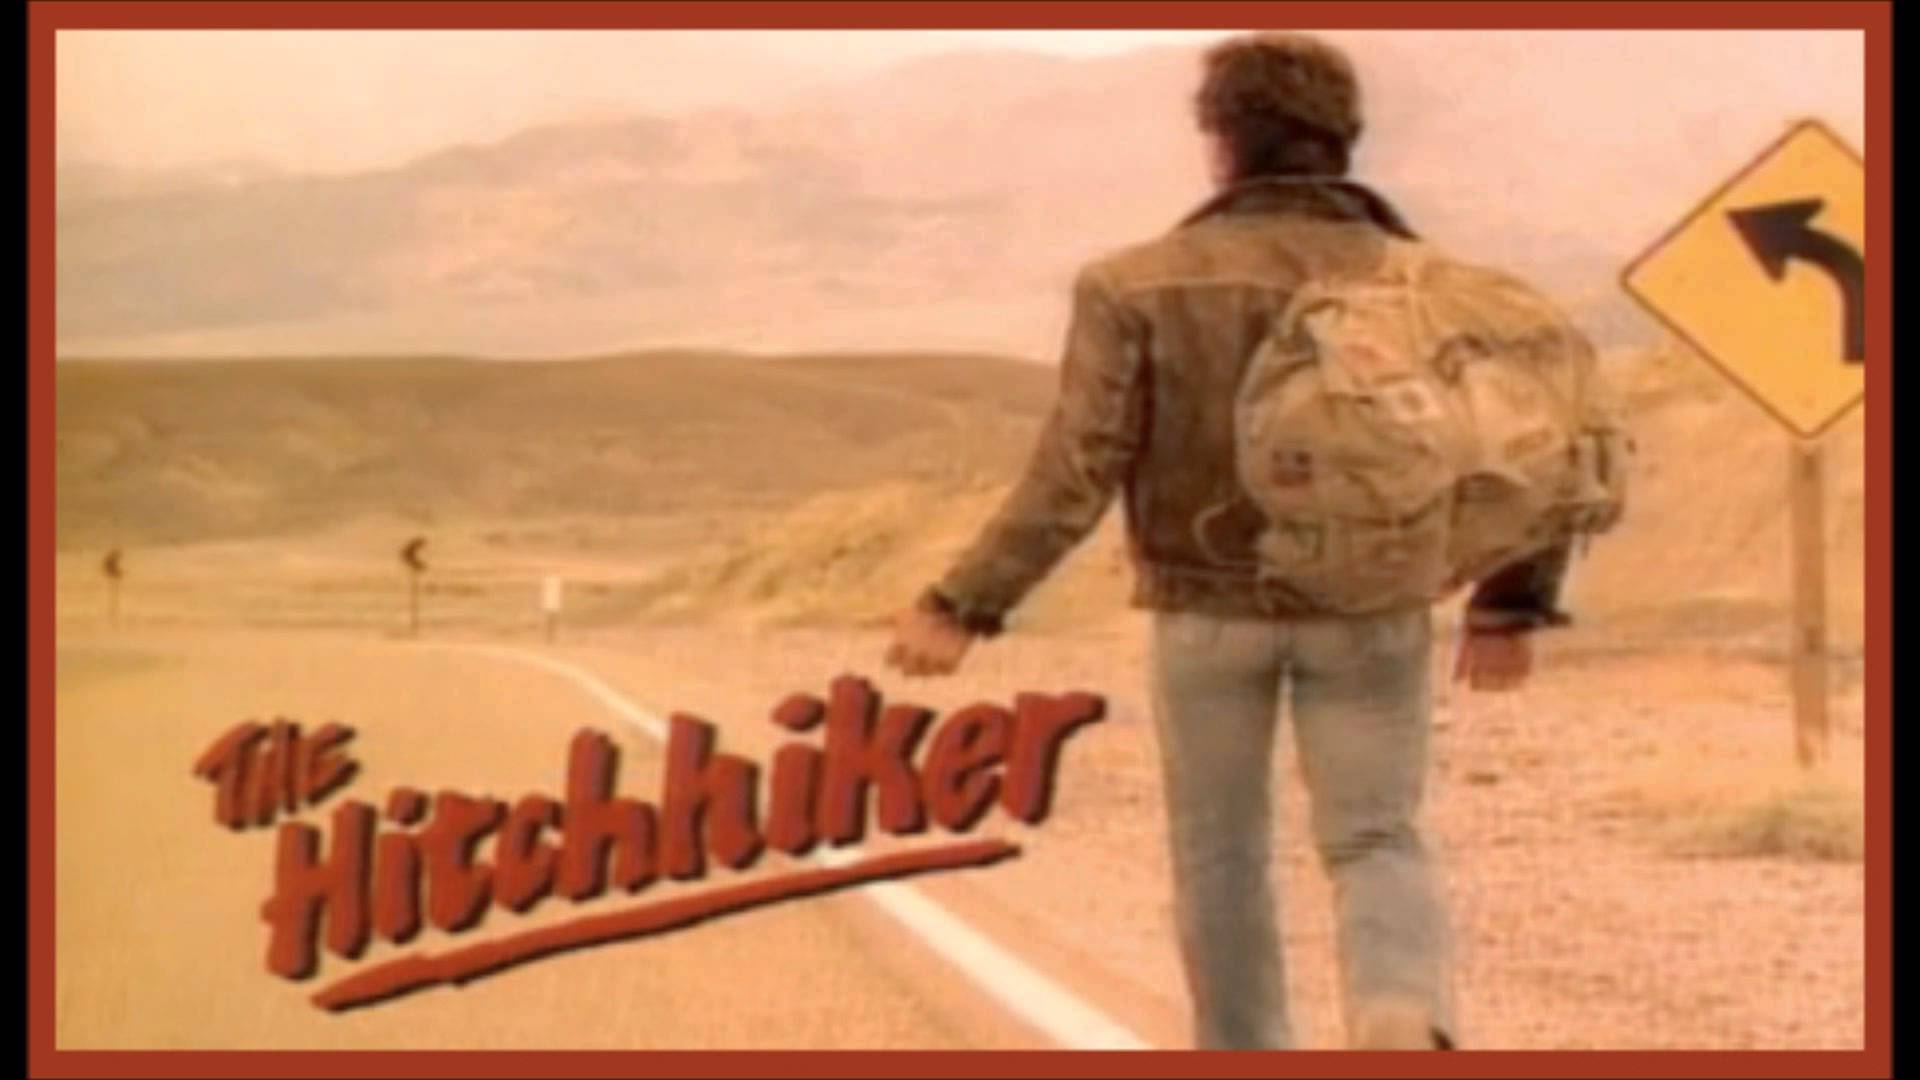 The hitchhiker photo